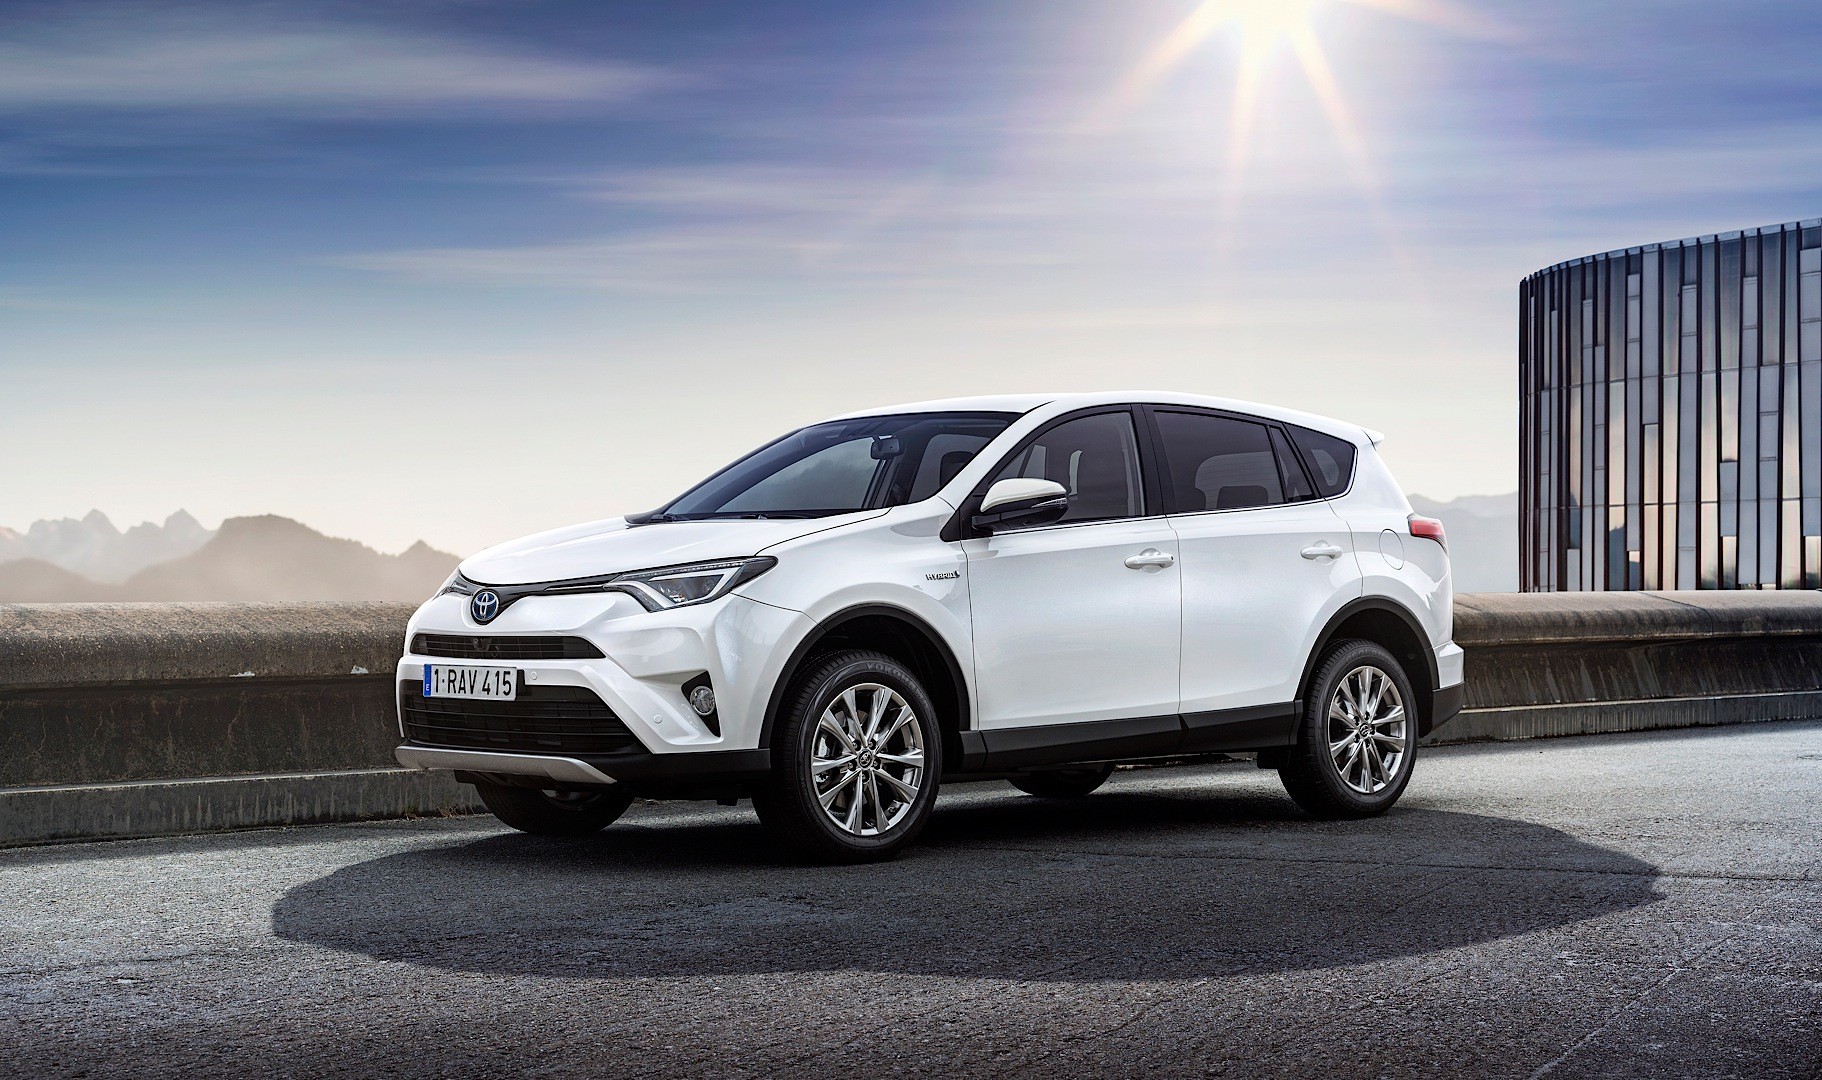 2016 Toyota RAV4 Hybrid One Limited Edition Marks European Debut of the